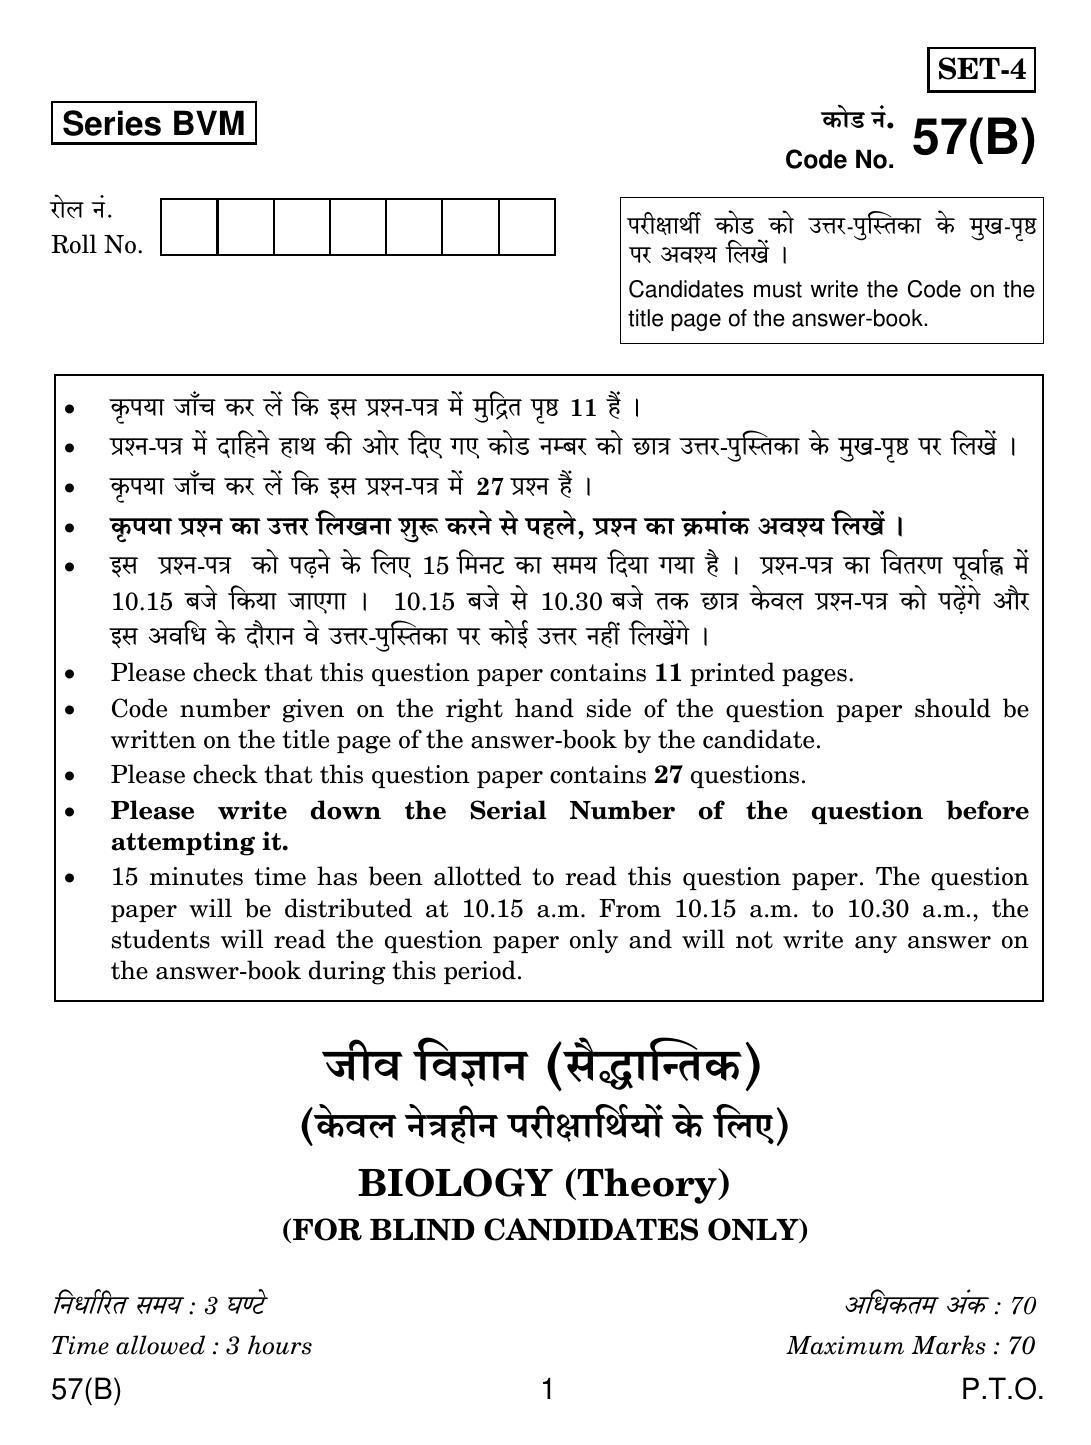 CBSE Class 12 57(B) Biology For Blind 2019 Question Paper - Page 1